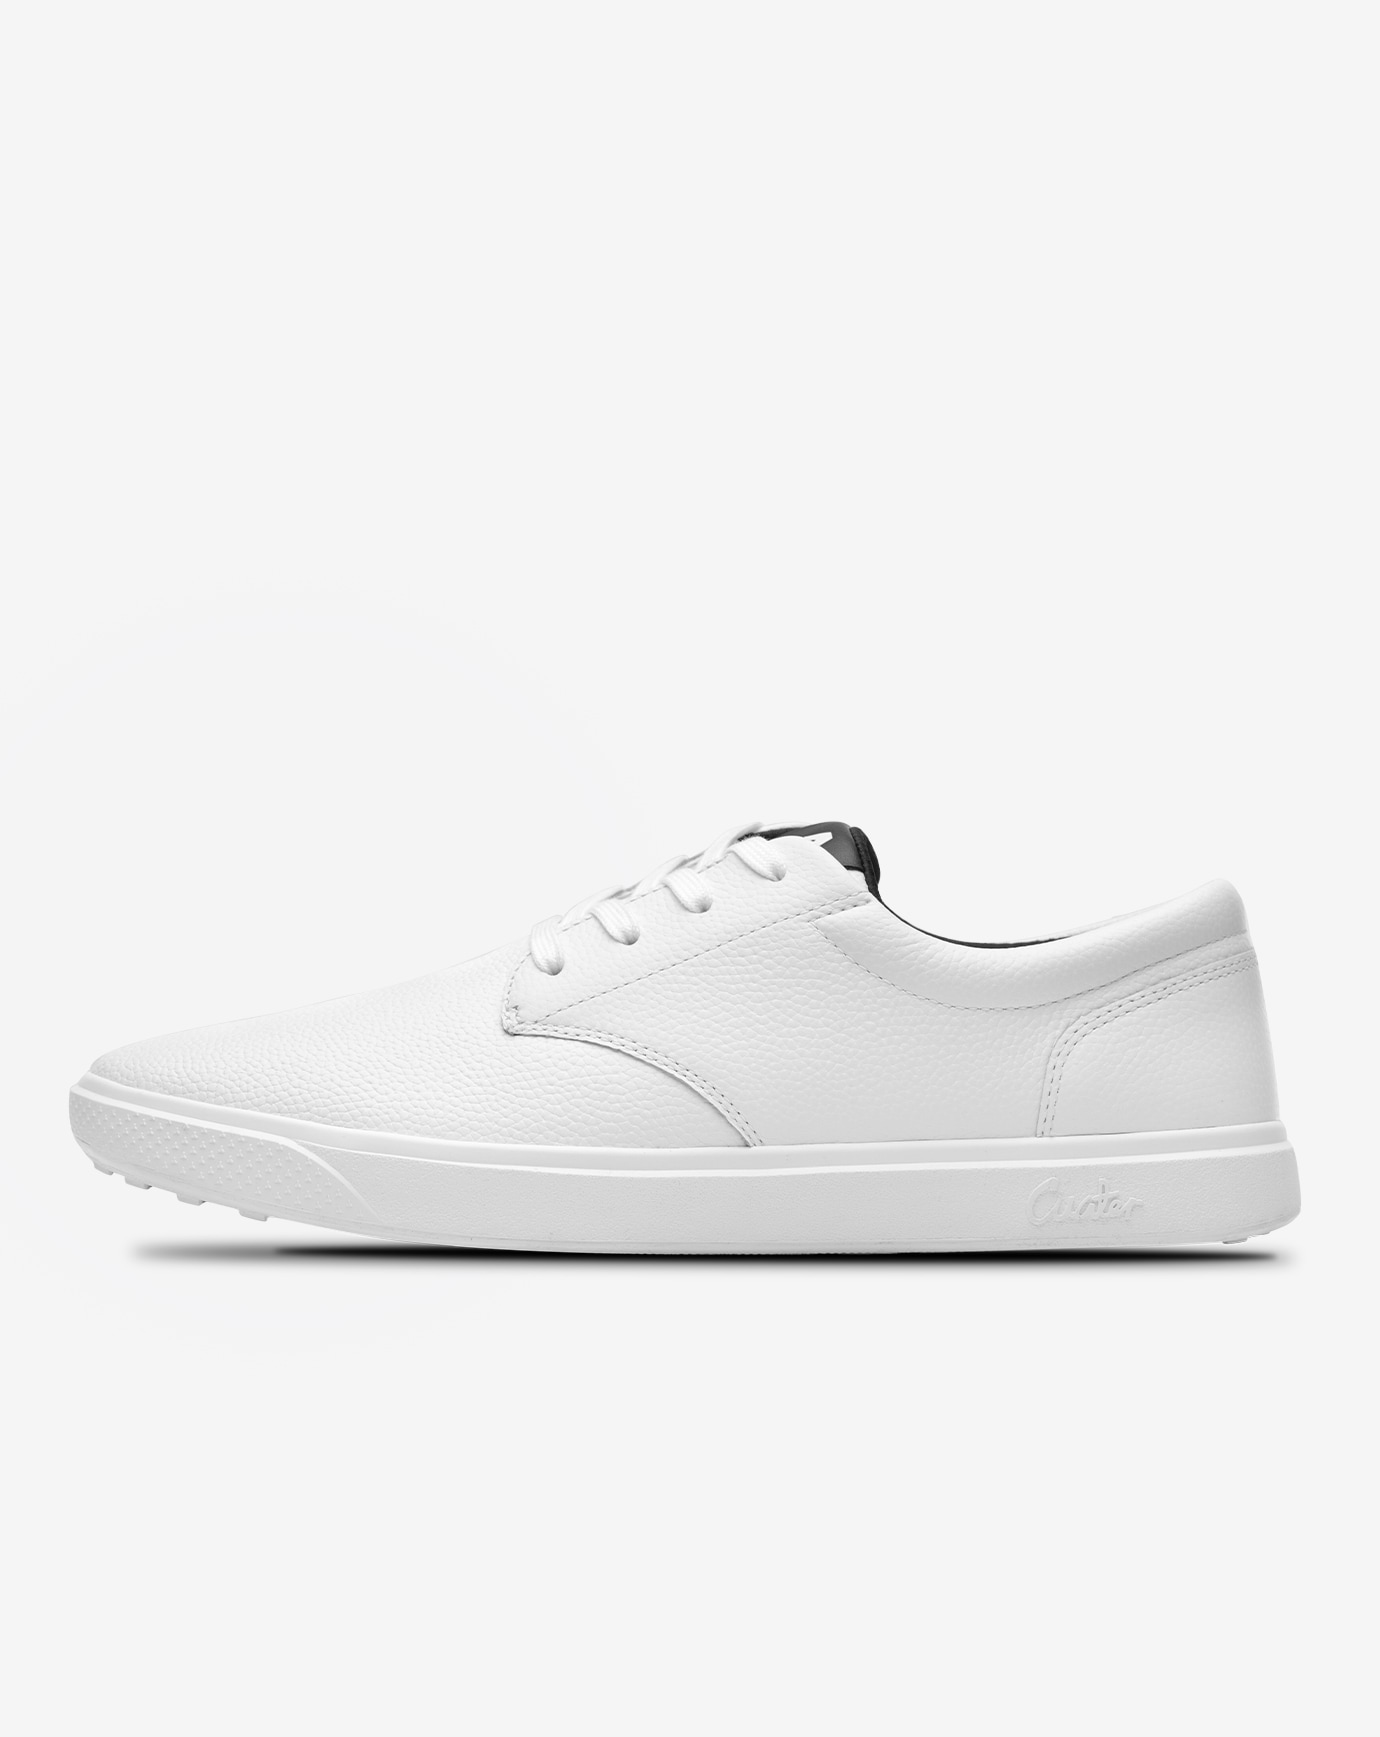 THE WILDCARD LEATHER SPIKELESS GOLF SHOE Image Thumbnail 1